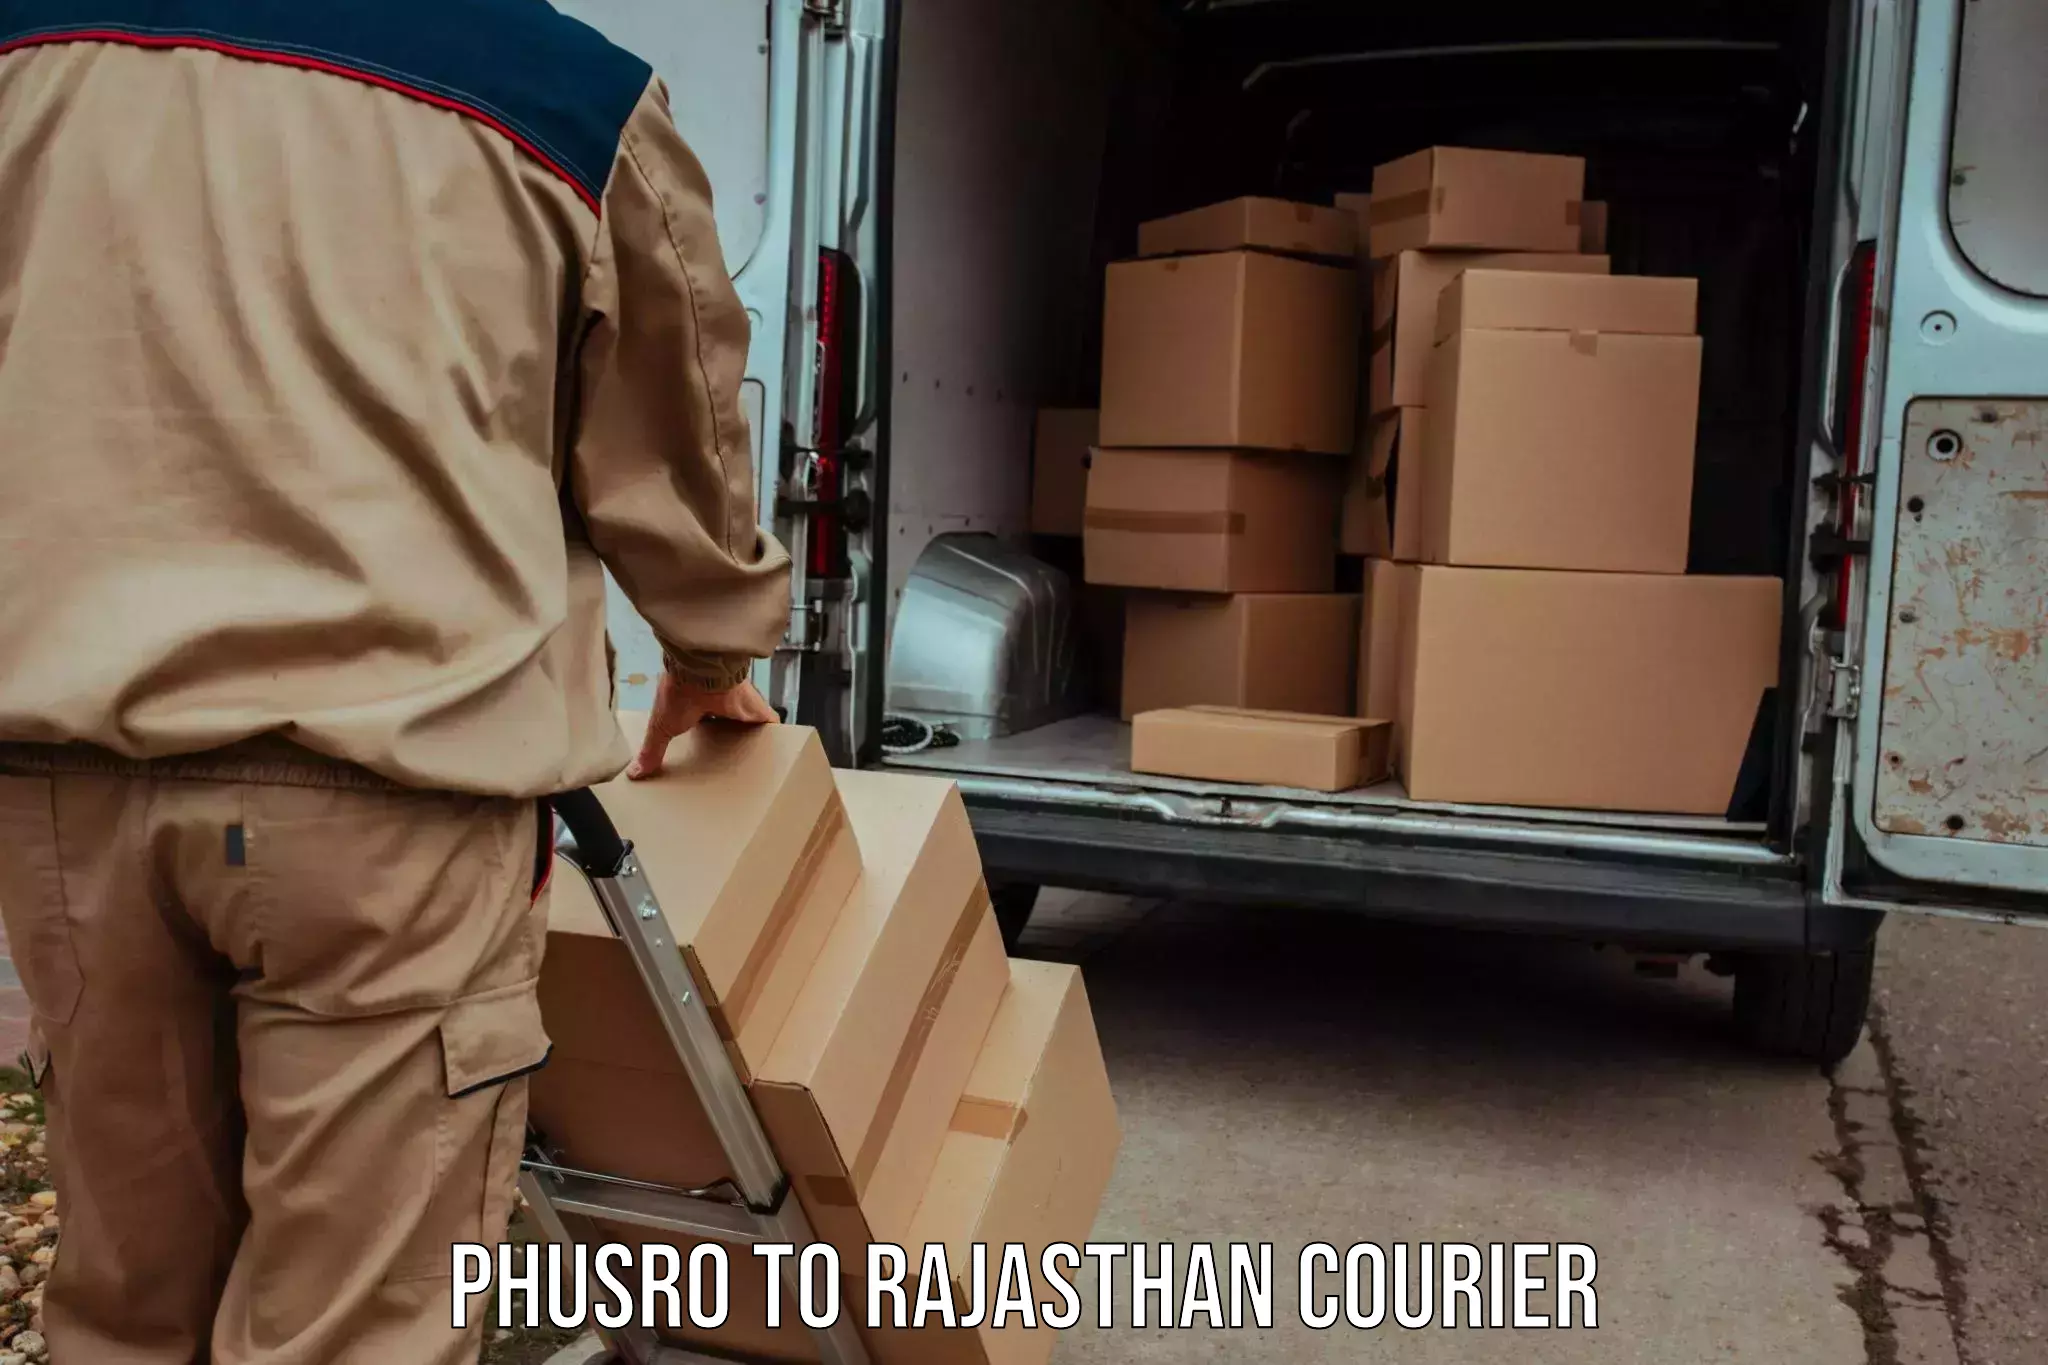 Global courier networks Phusro to Rajasthan